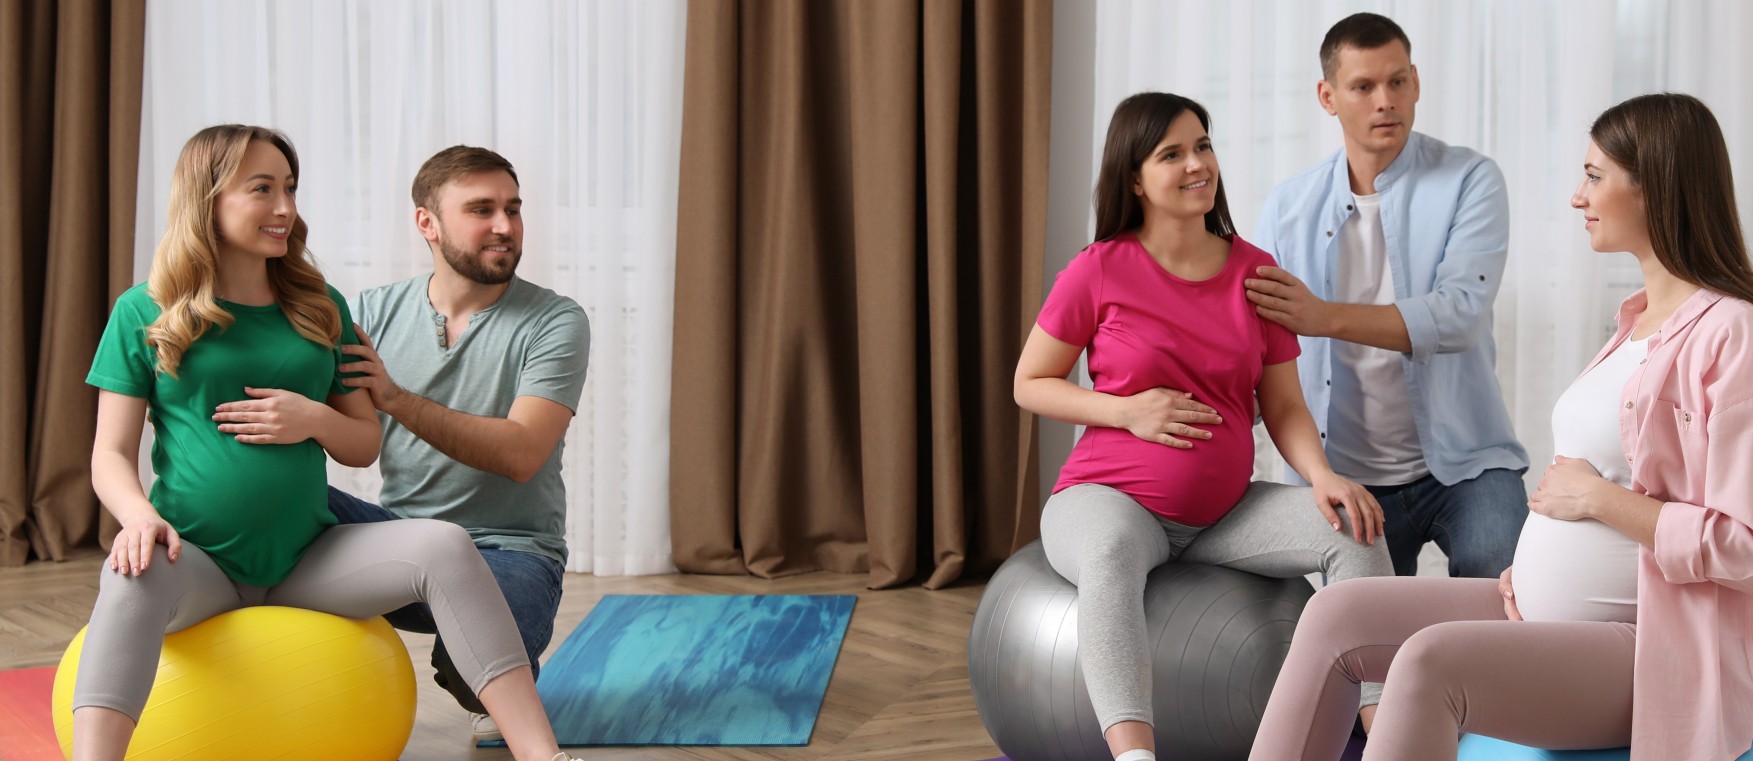 Pregnant women with men and doctor at courses for expectant parents indoors